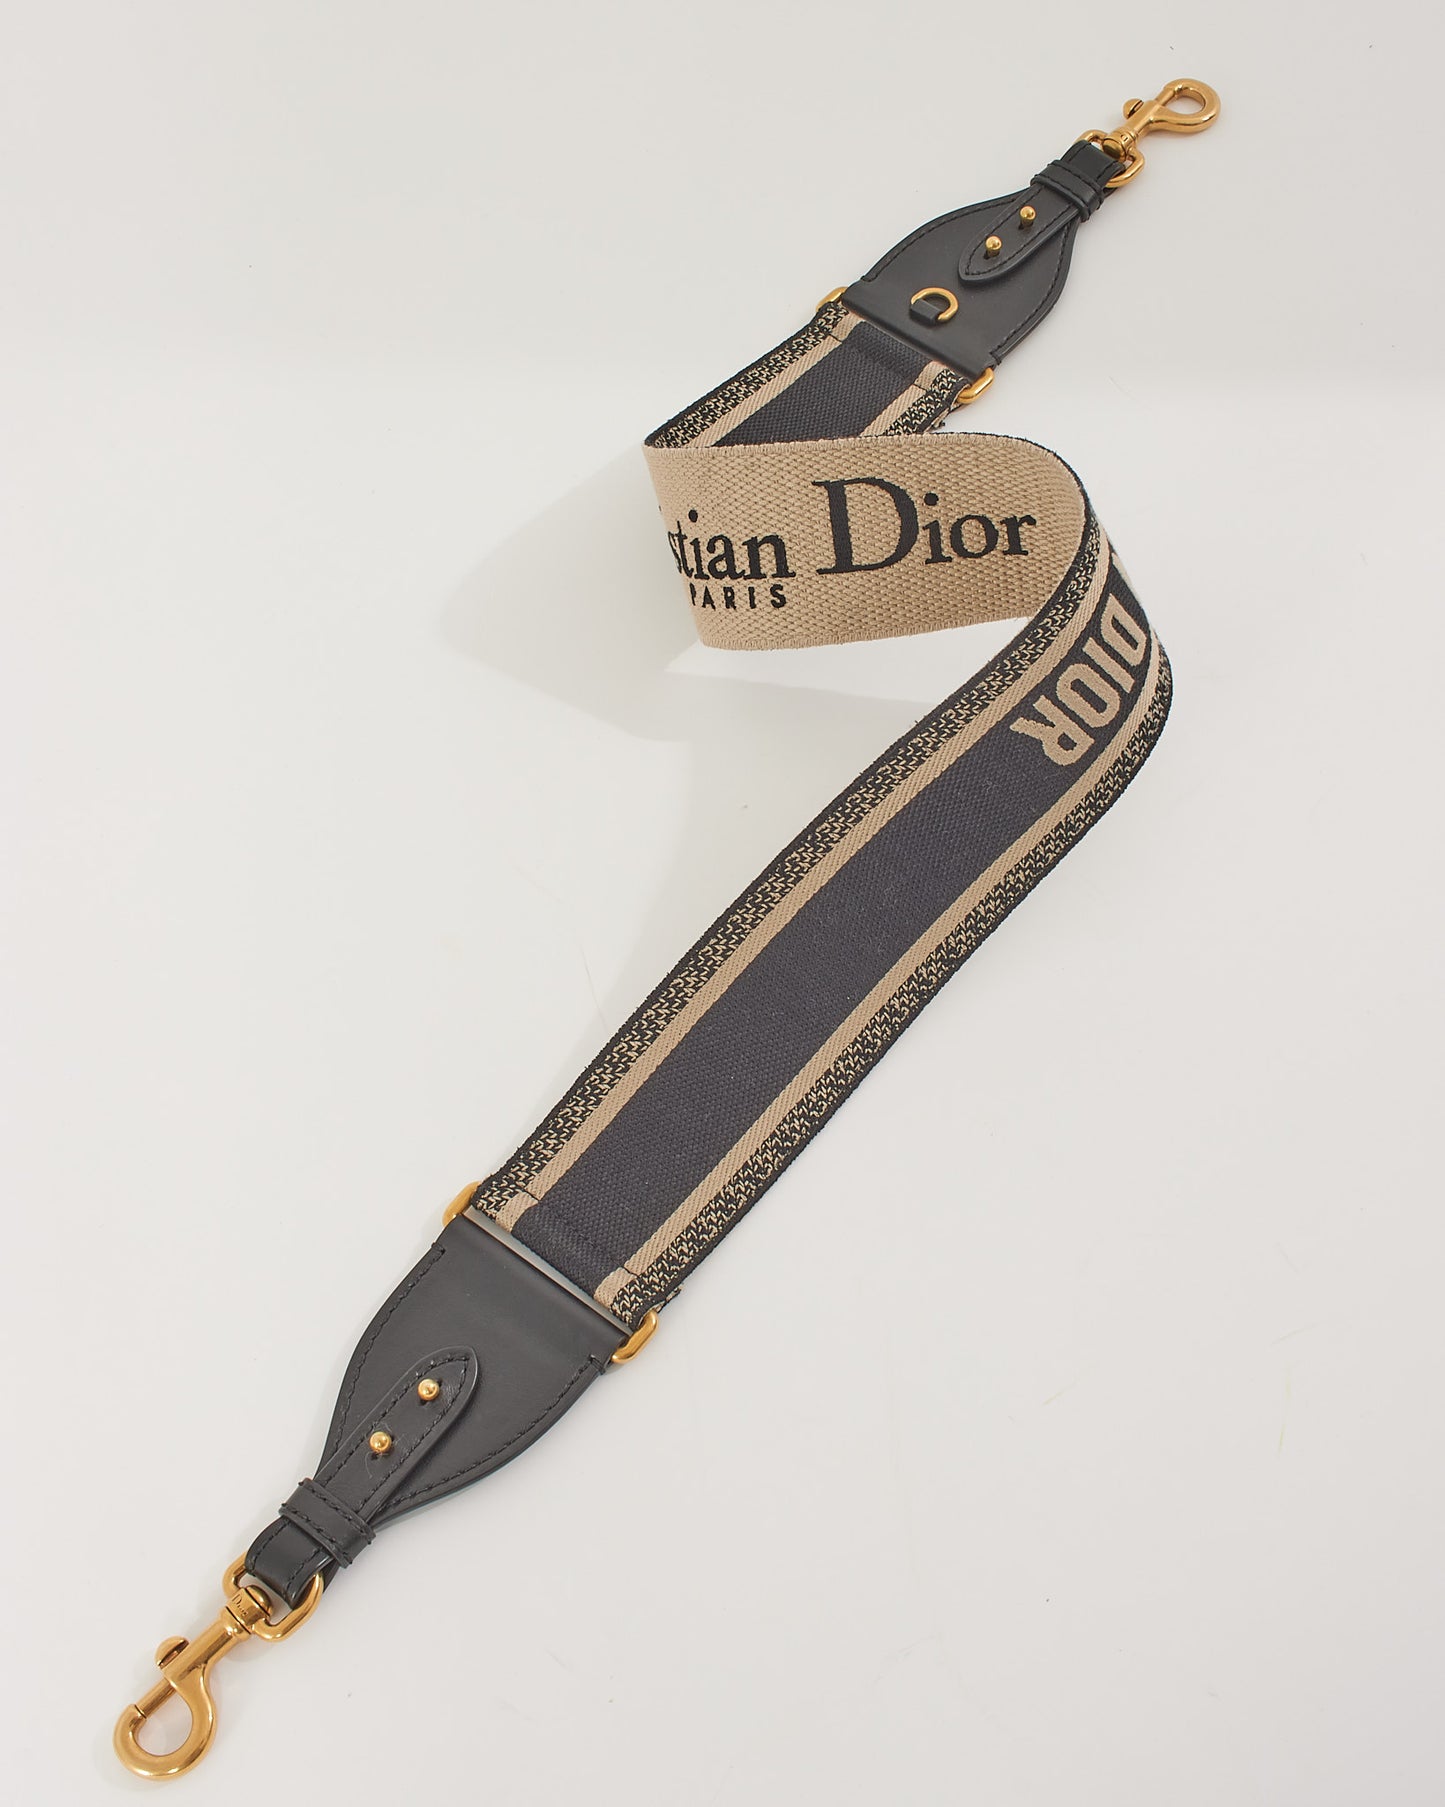 Dior Black 'CHRISTIAN DIOR PARIS' Embroidery Strap with Ring